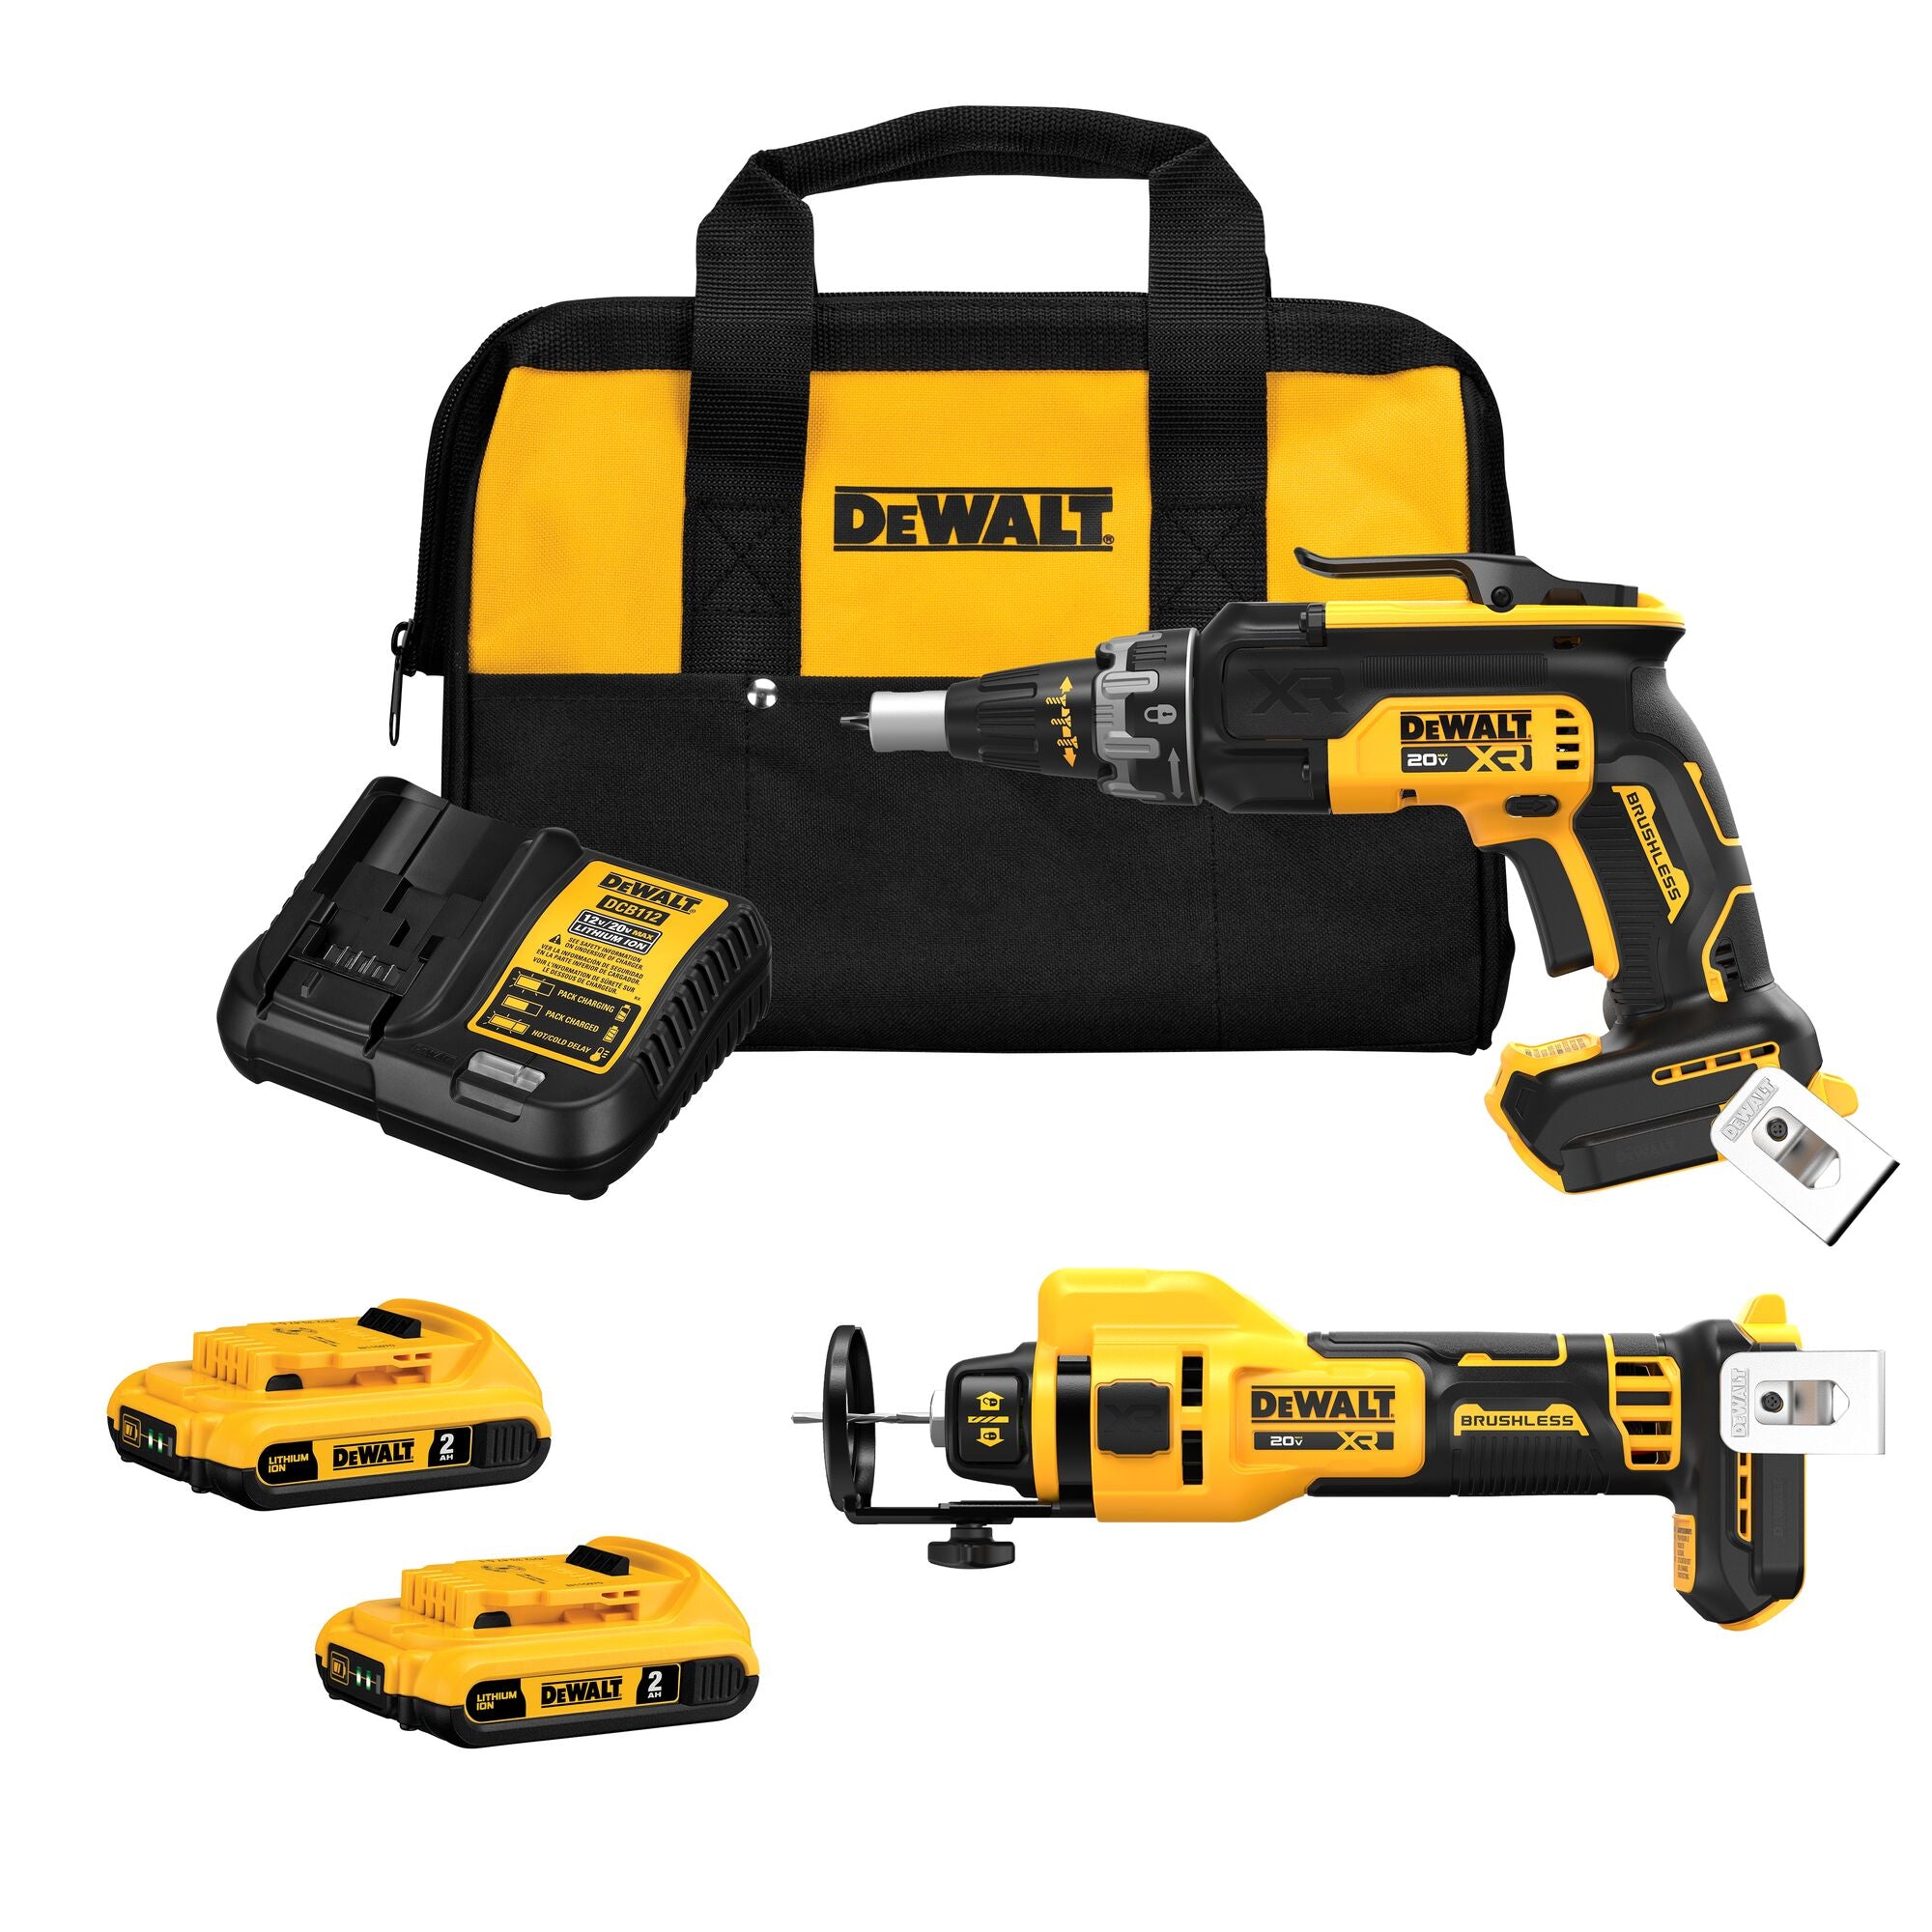 DEWALT DCK265D2 20V MAX XR Lithium-Ion Brushless Cordless 2-Tool Combo Kit w/ Screwgun and Cut-Out Tool 2.0 Ah